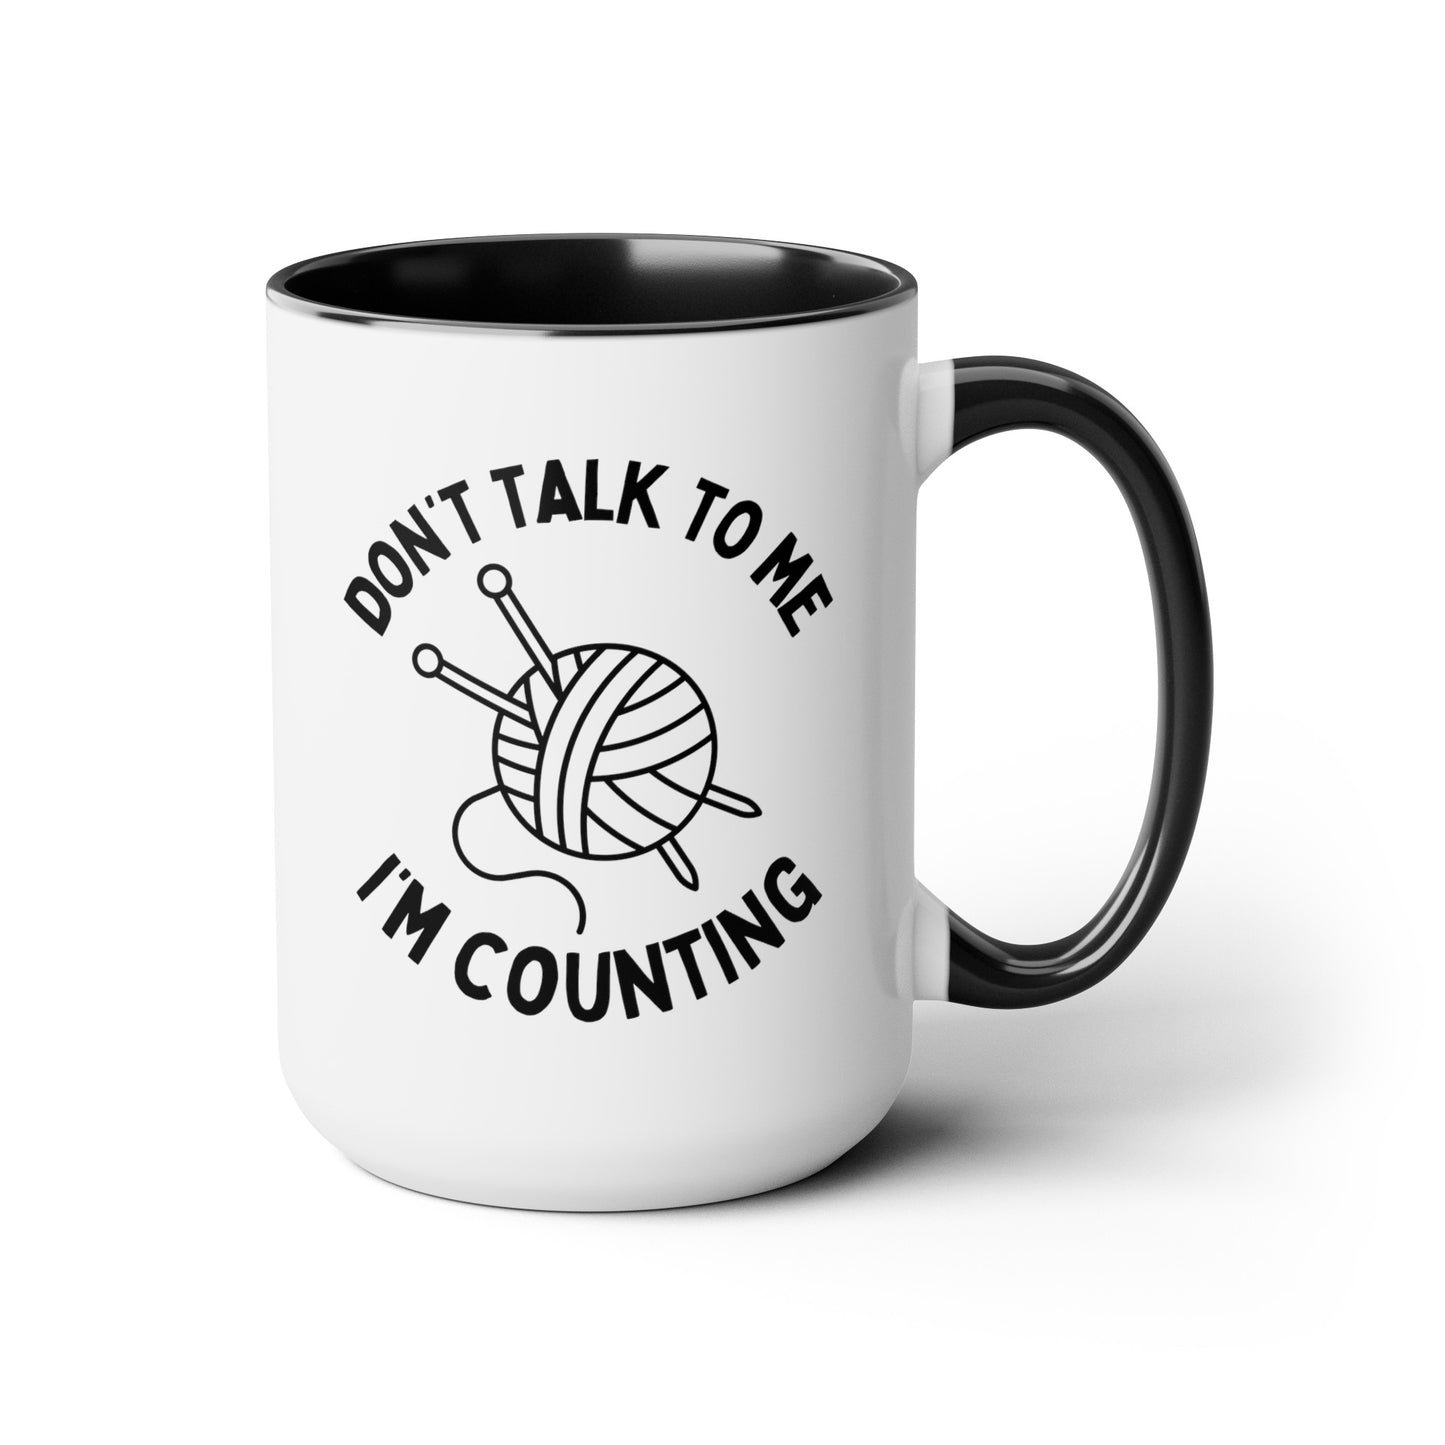 Don't Talk To Me I'm Counting 15oz white with black accent funny large coffee mug gift for knitter knitting crochet crocheter knit hobby waveywares wavey wares wavywares wavy wares